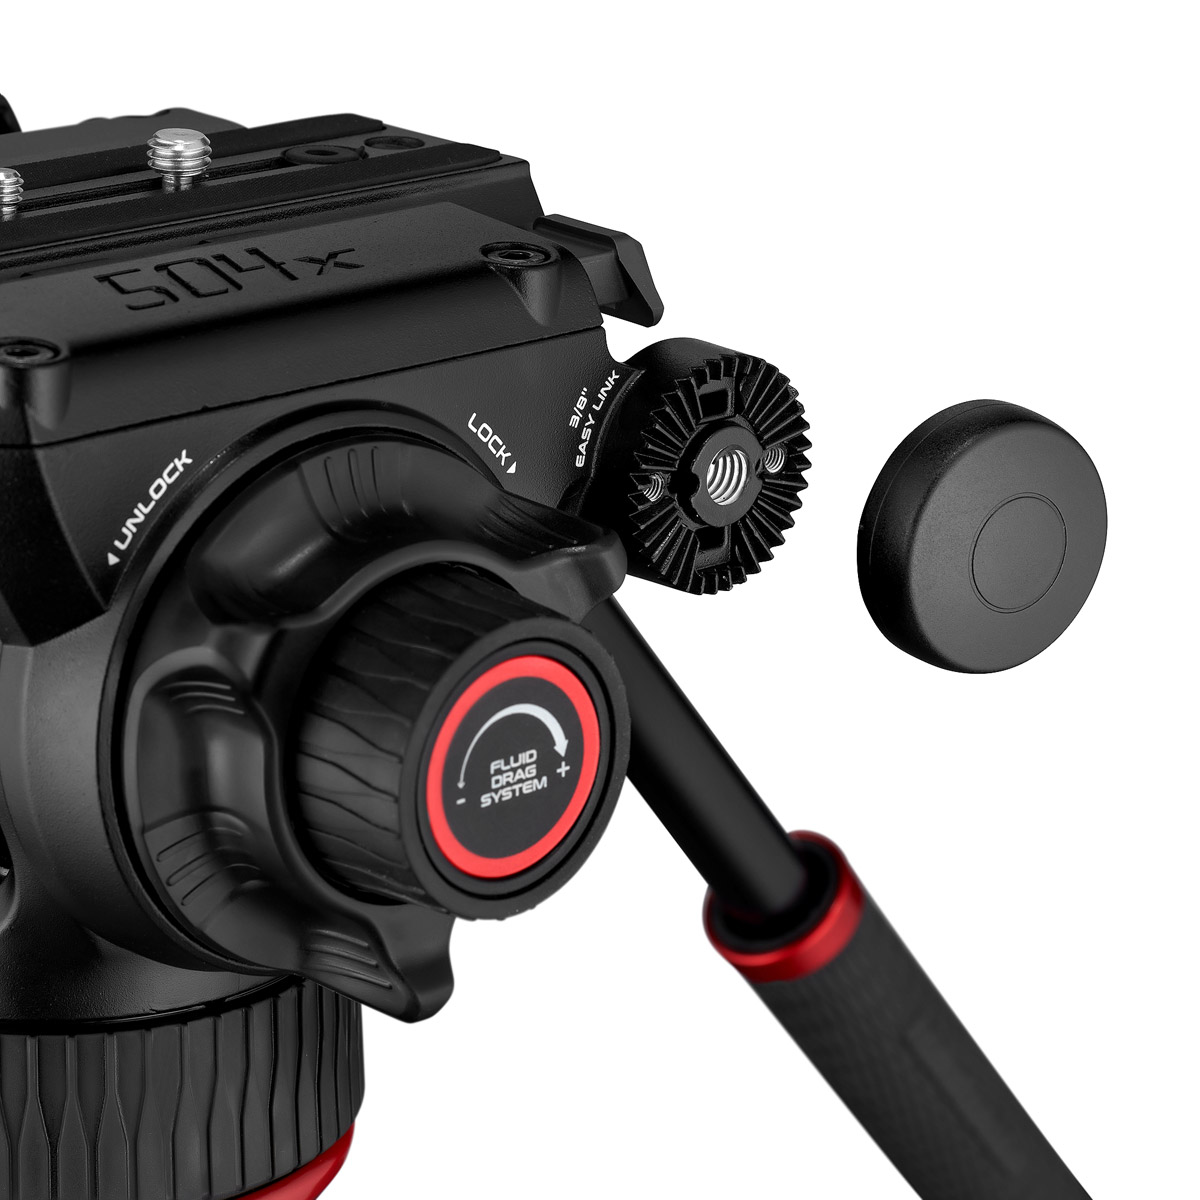 Manfrotto 504x